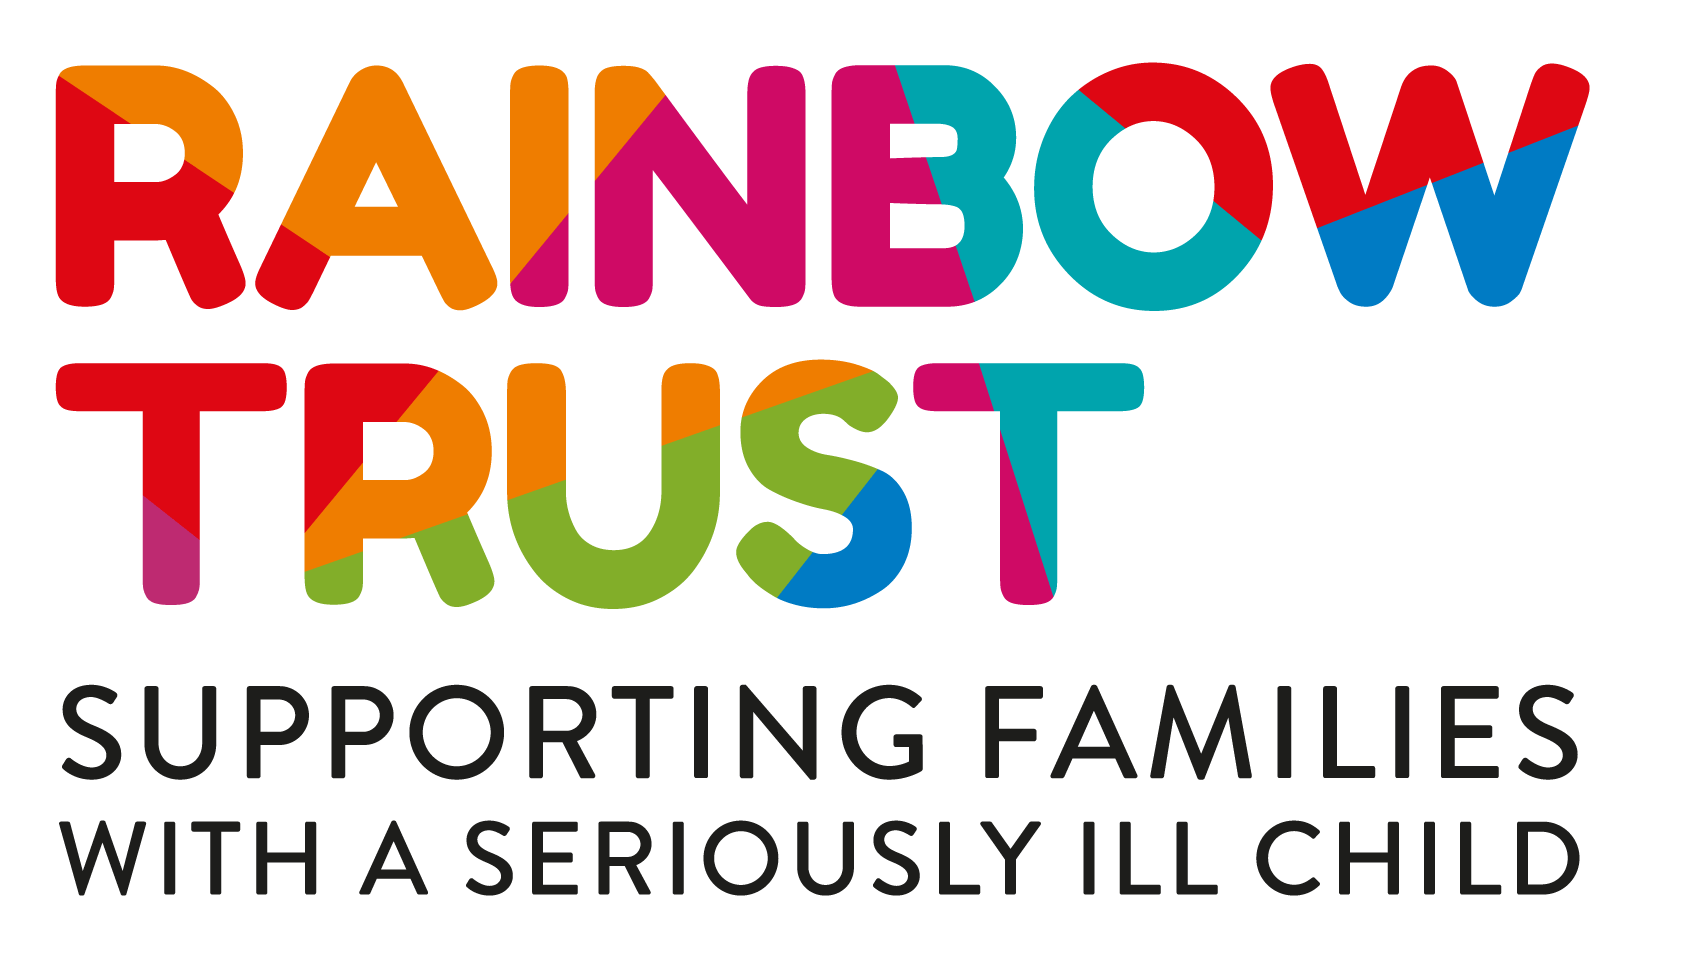 LMForums and The London Market raises £2,430.63 for the Rainbow Trust